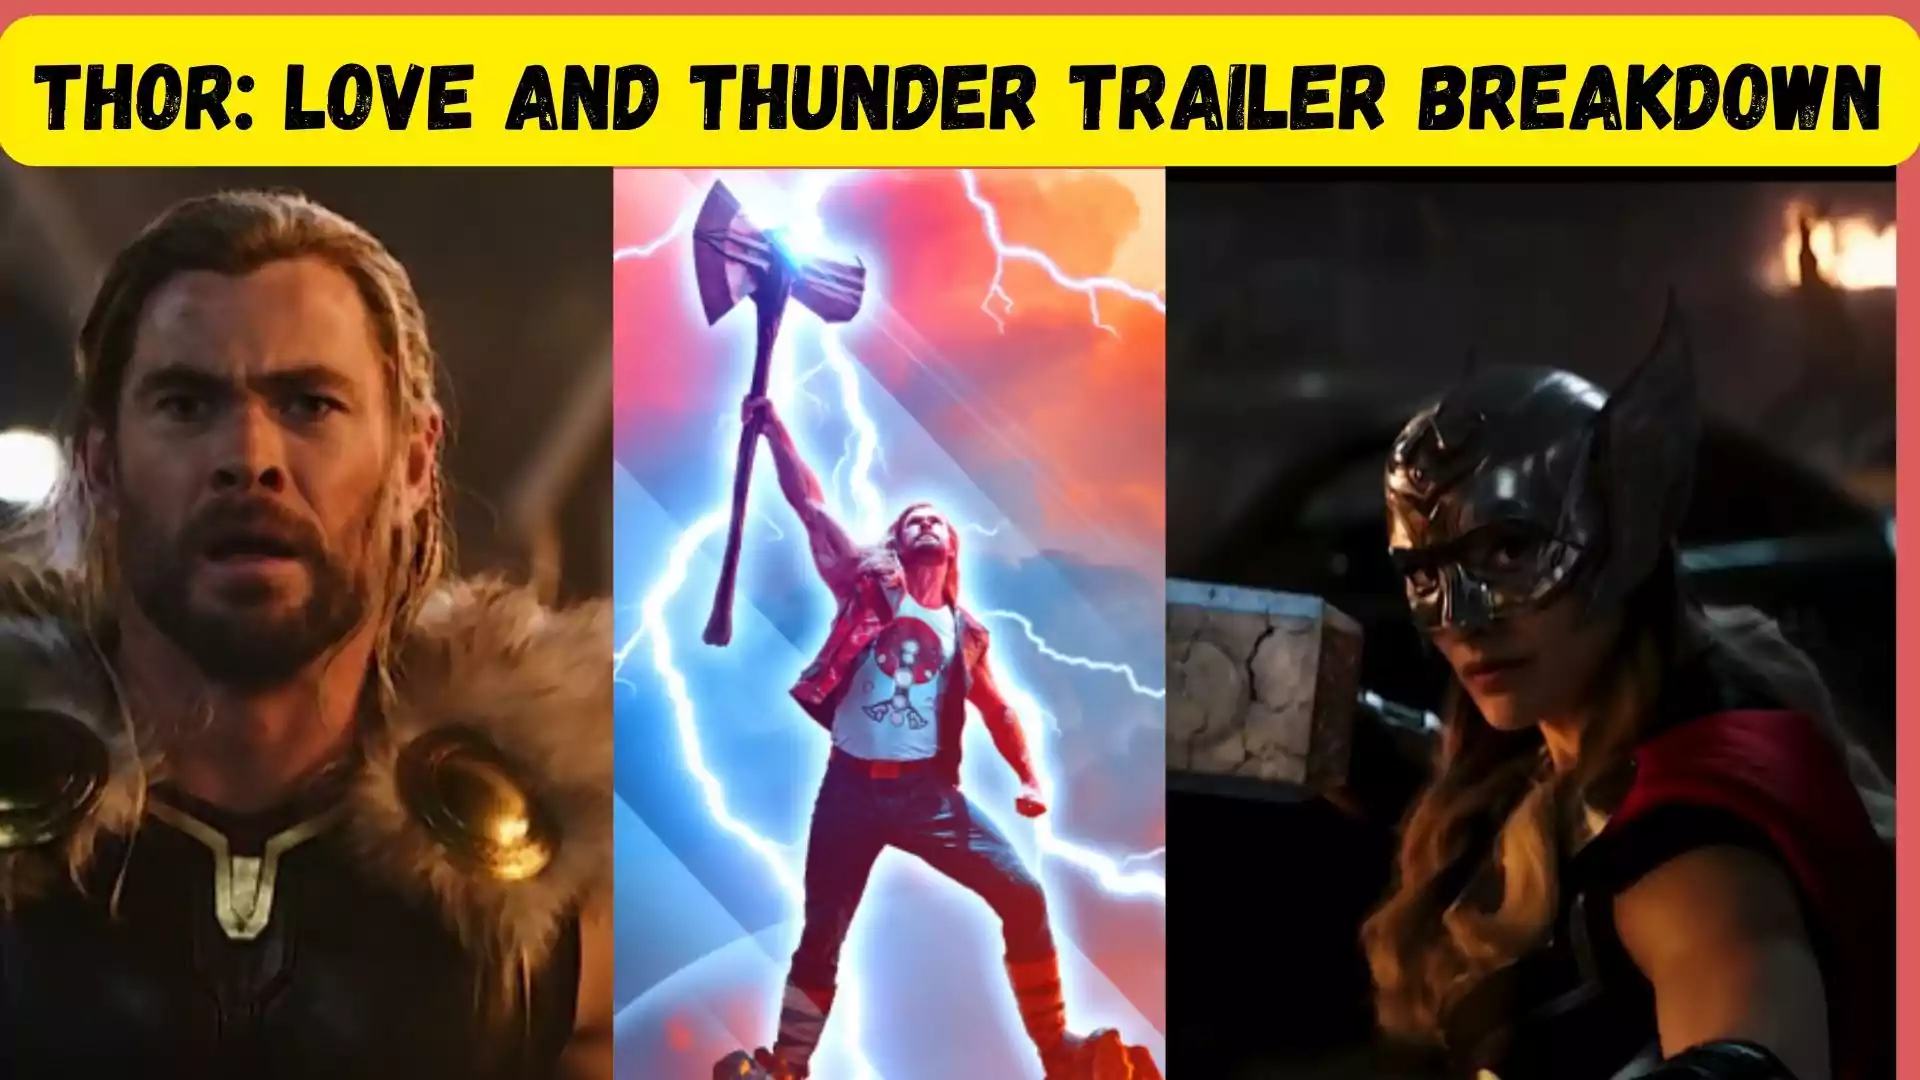 Thor: Love and Thunder Trailer Breakdown walpaper and images